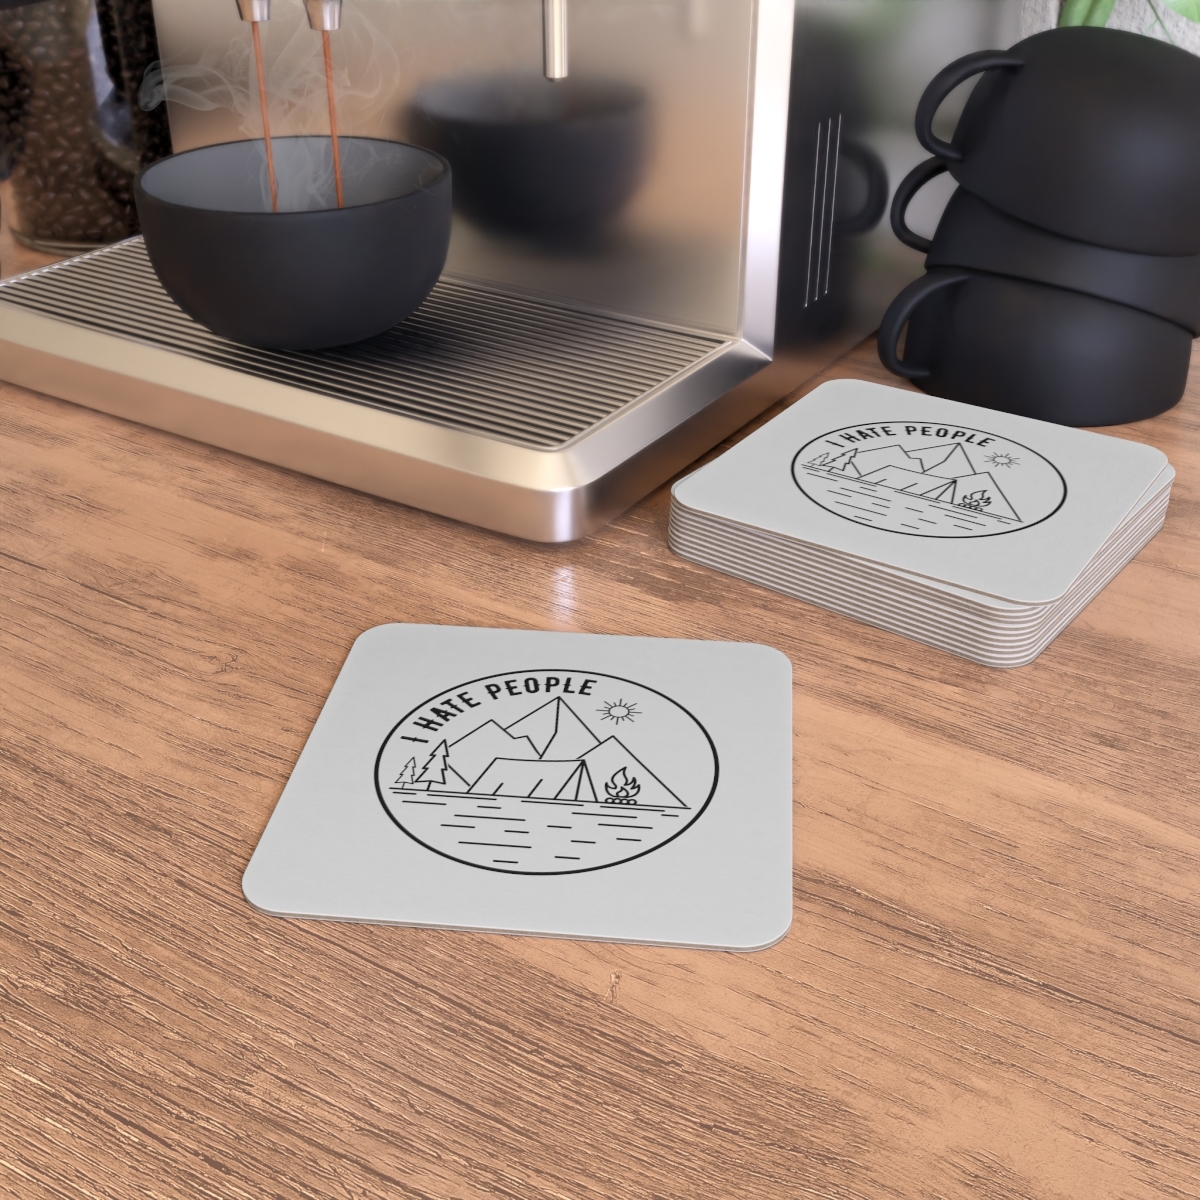 50/100pcs Camping "I Hate People" Coasters Set for Campervan Accessories - $81.37 - $126.69